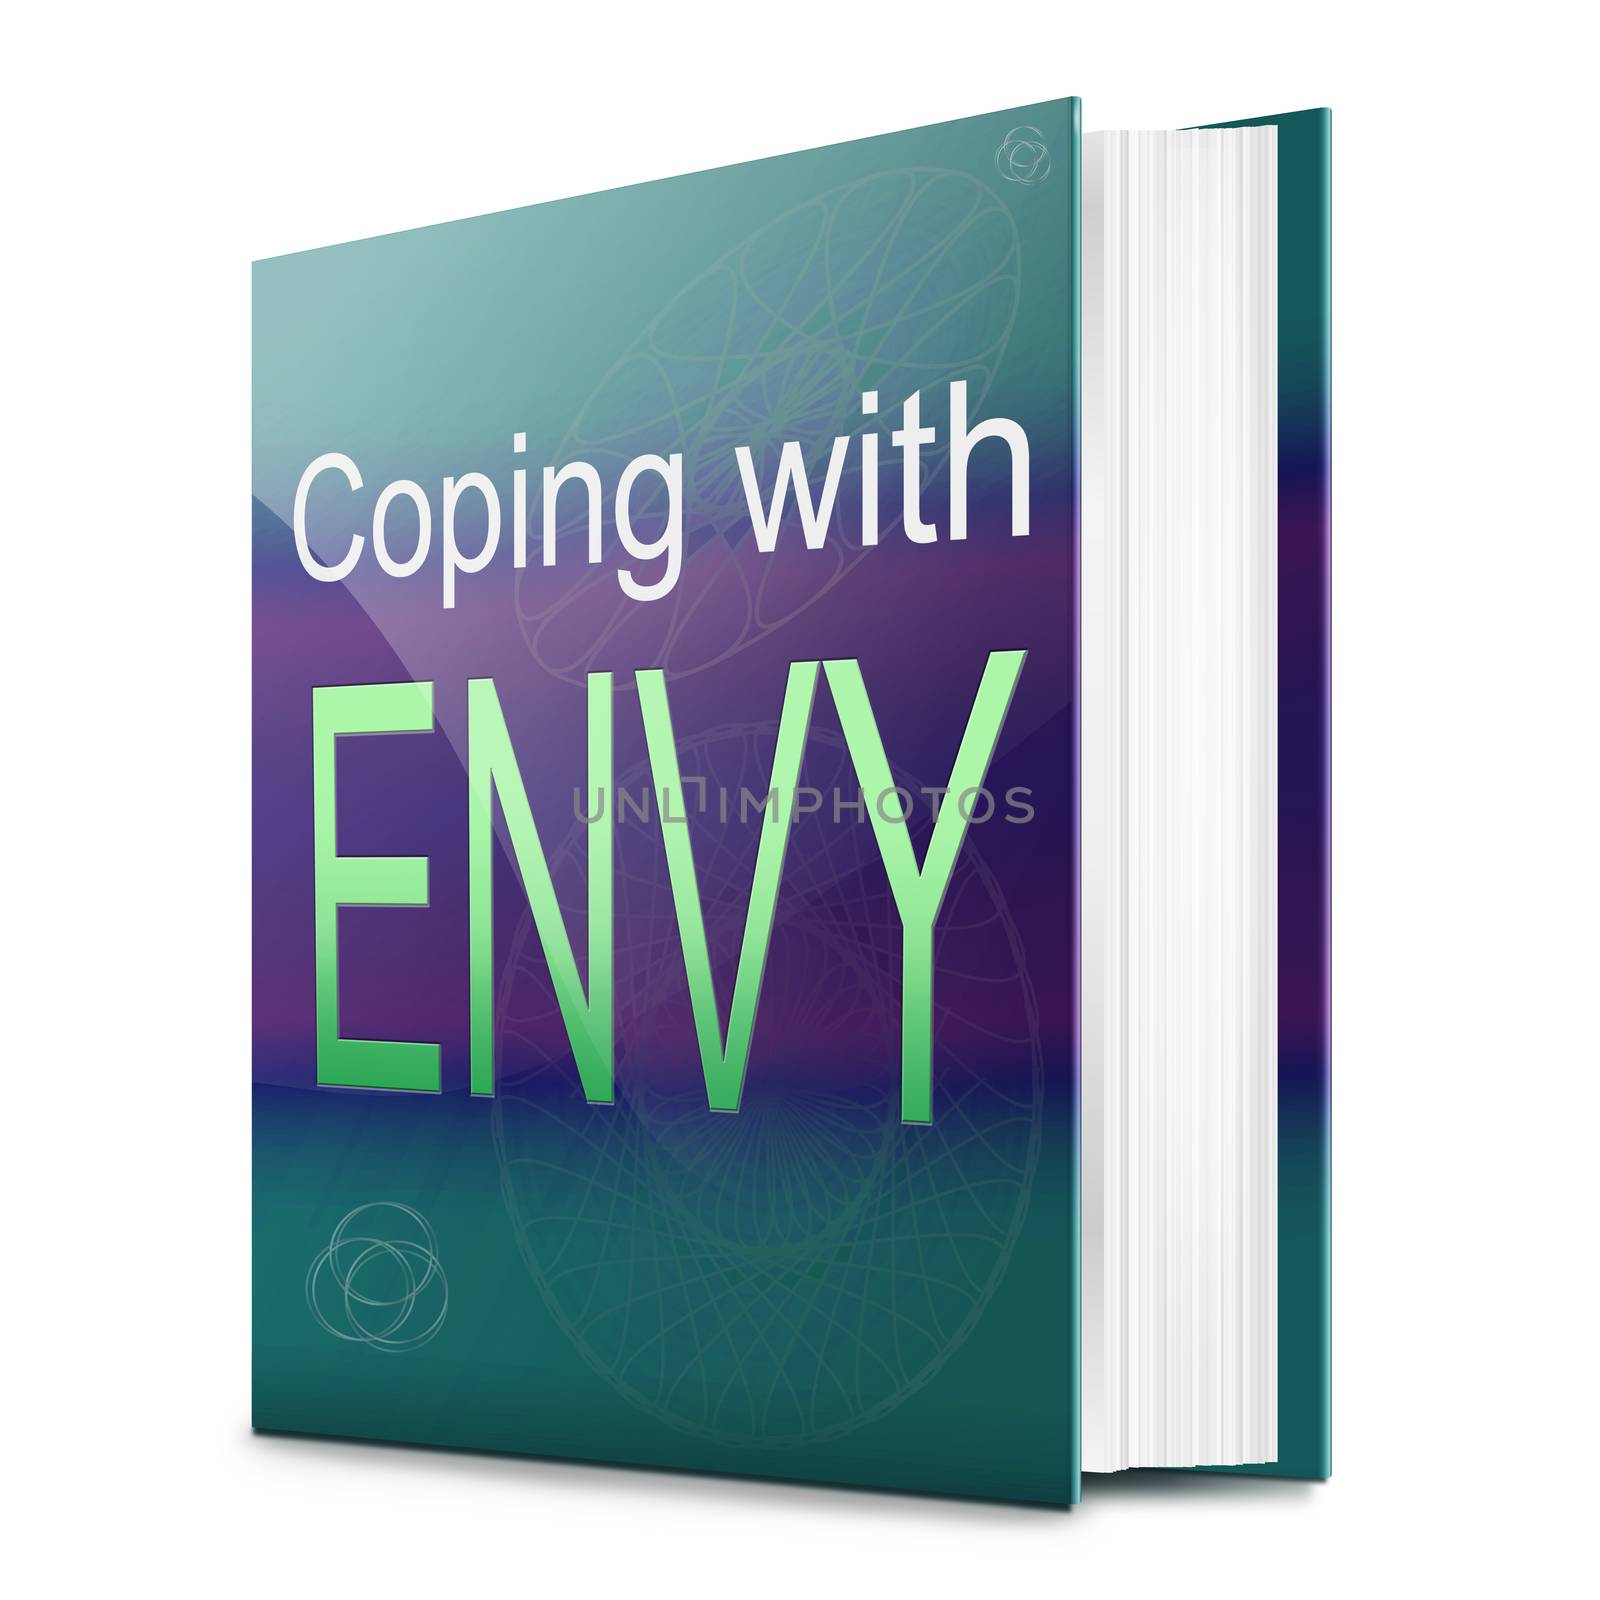 Illustration depicting a text book with an envy concept title. White background.